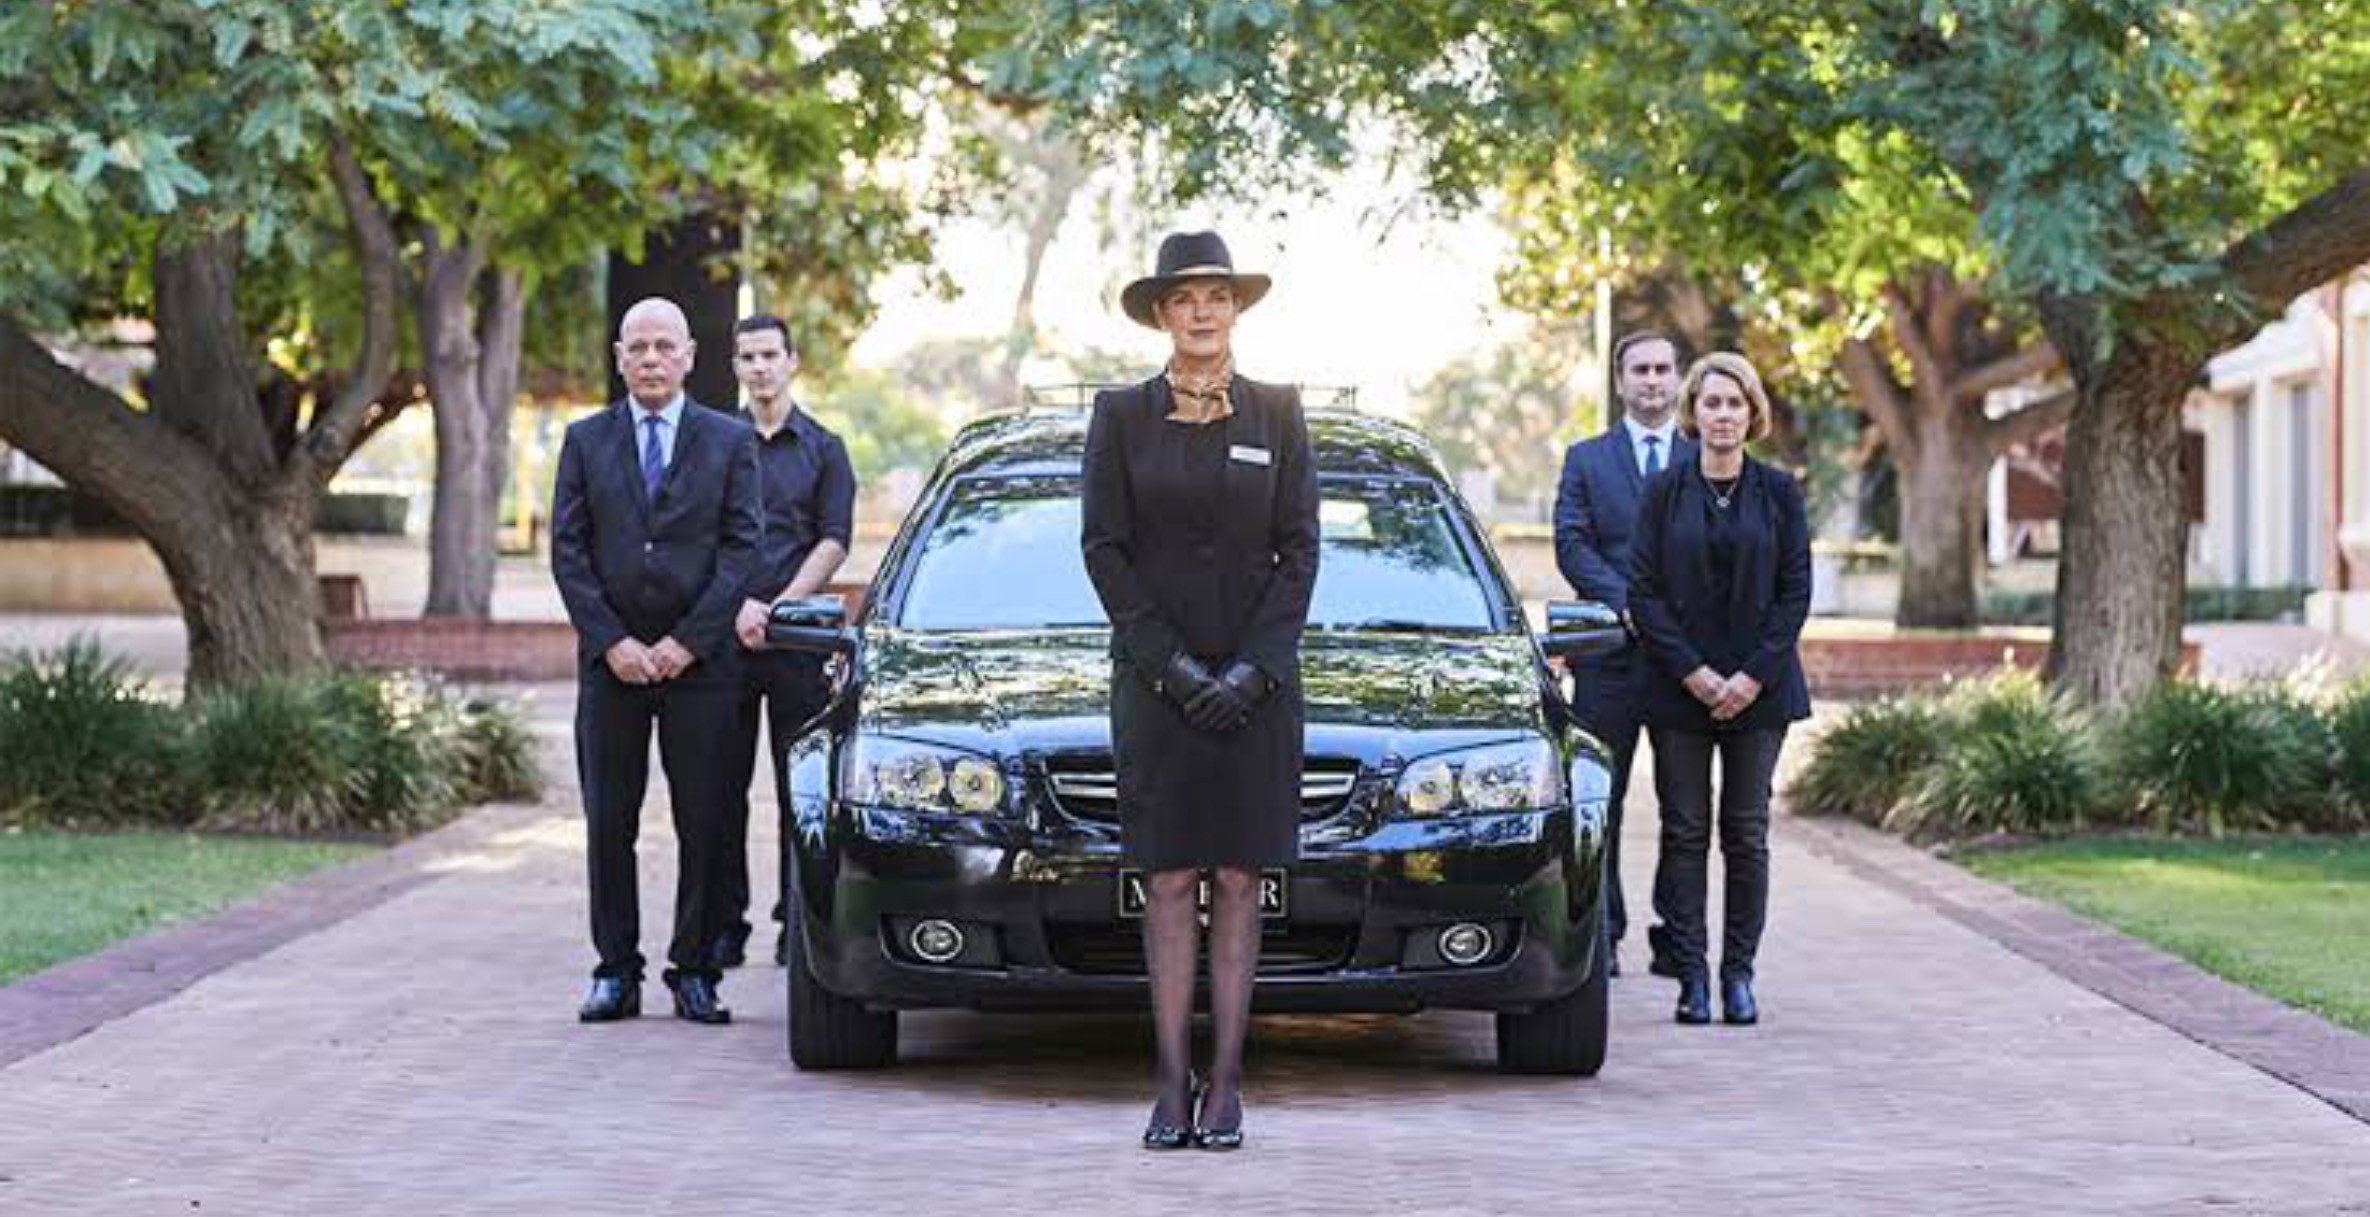 GET YOUR FREE FUNERAL DIRECTOR LISTING